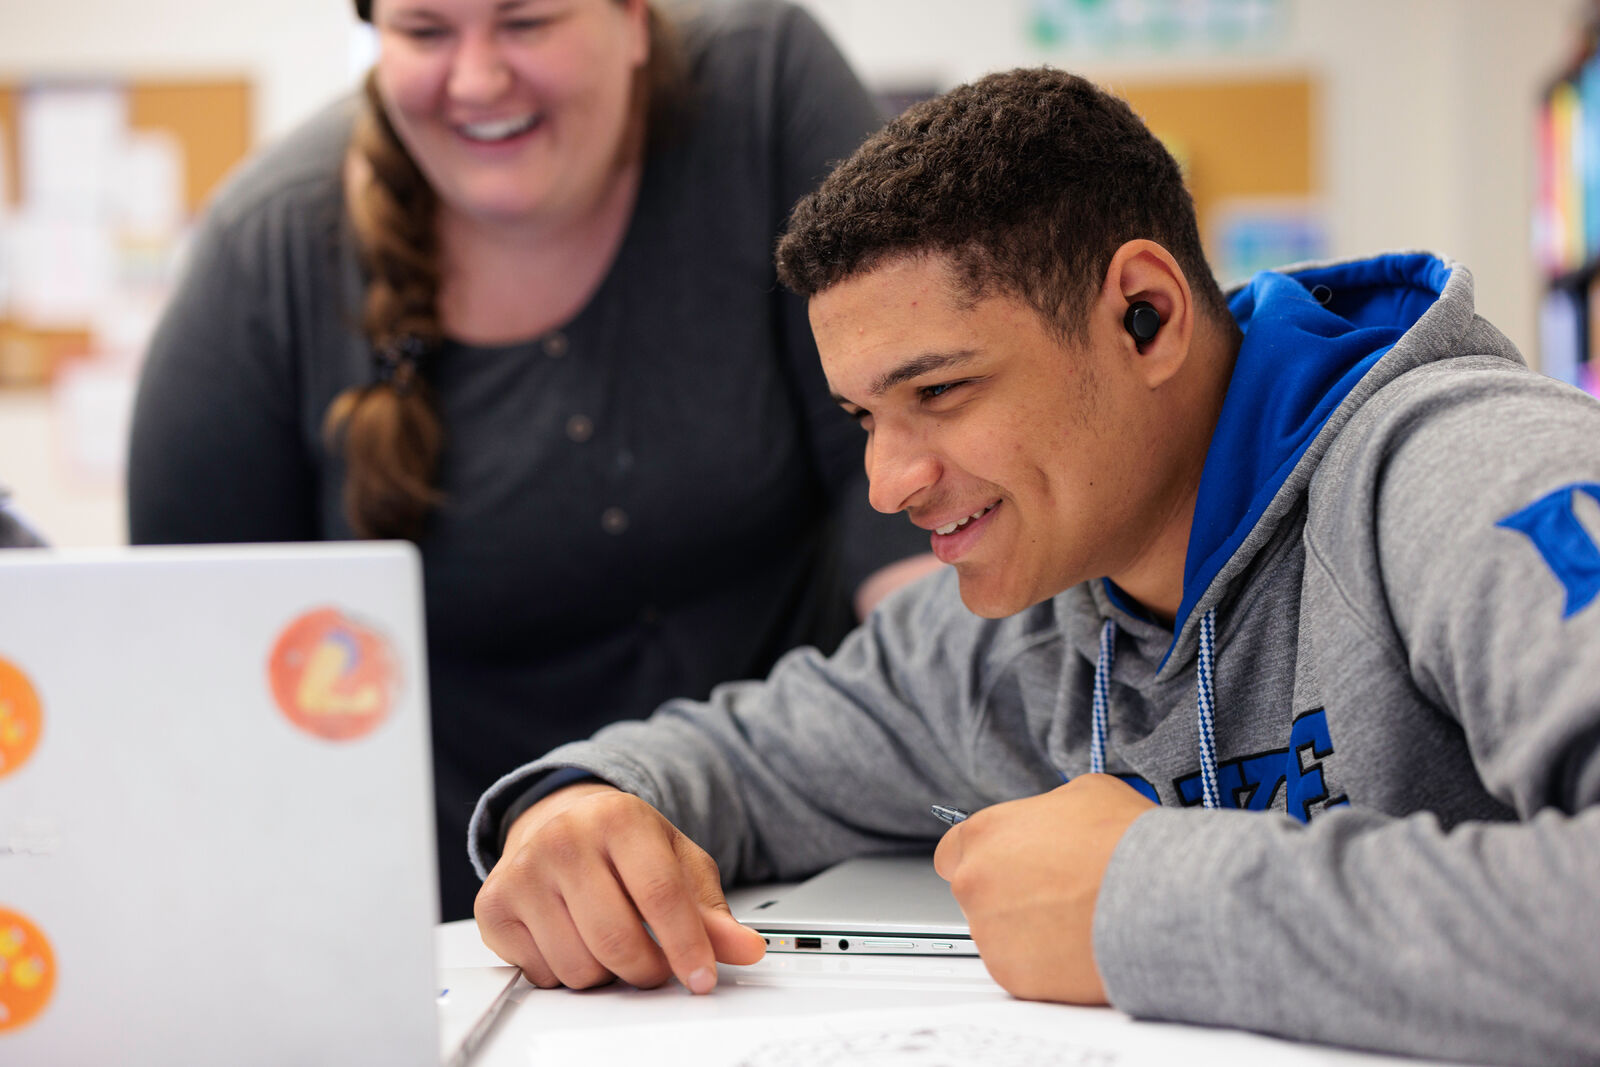 A student smiles while looking at a laptop with his teacher.